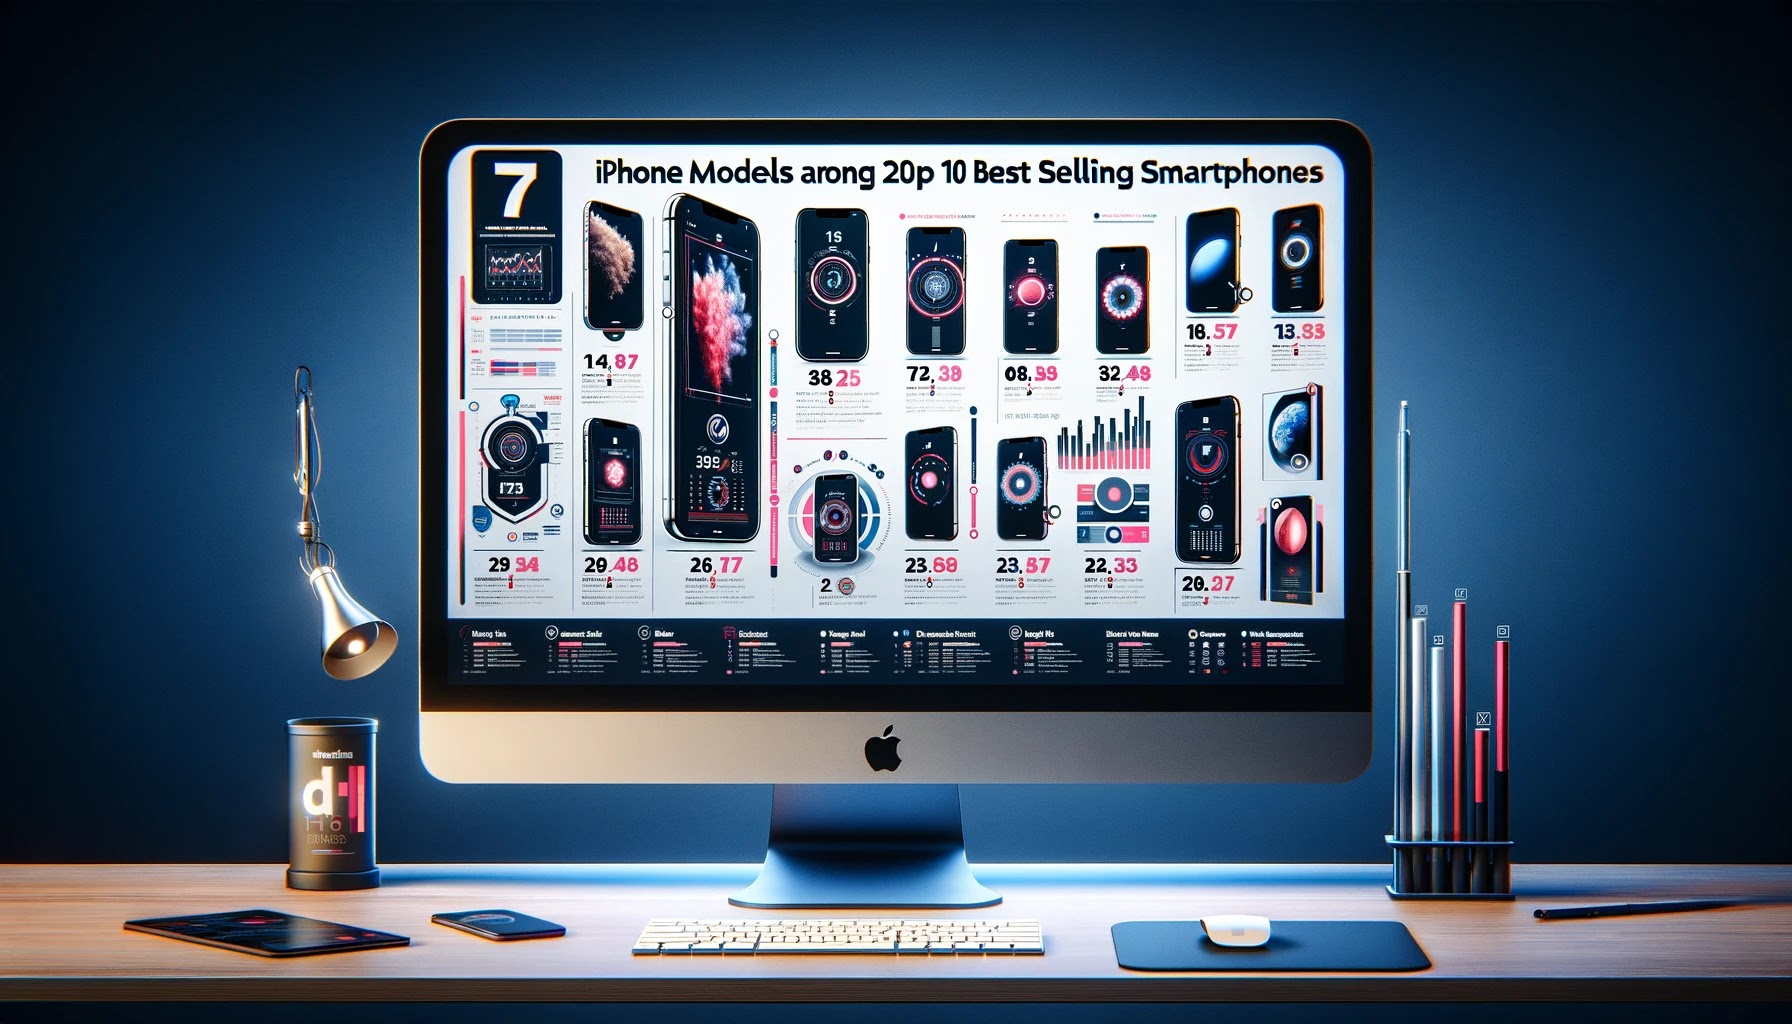 7 iPhone Models Among 2023's Top 10 Best Selling Smartphones 2023 was a watershed year for Apple as the tech titan dominated the global smartphone market, with seven of its iPhone models taking the top 10 spots by sales, according to a report from Counterpoint Research.